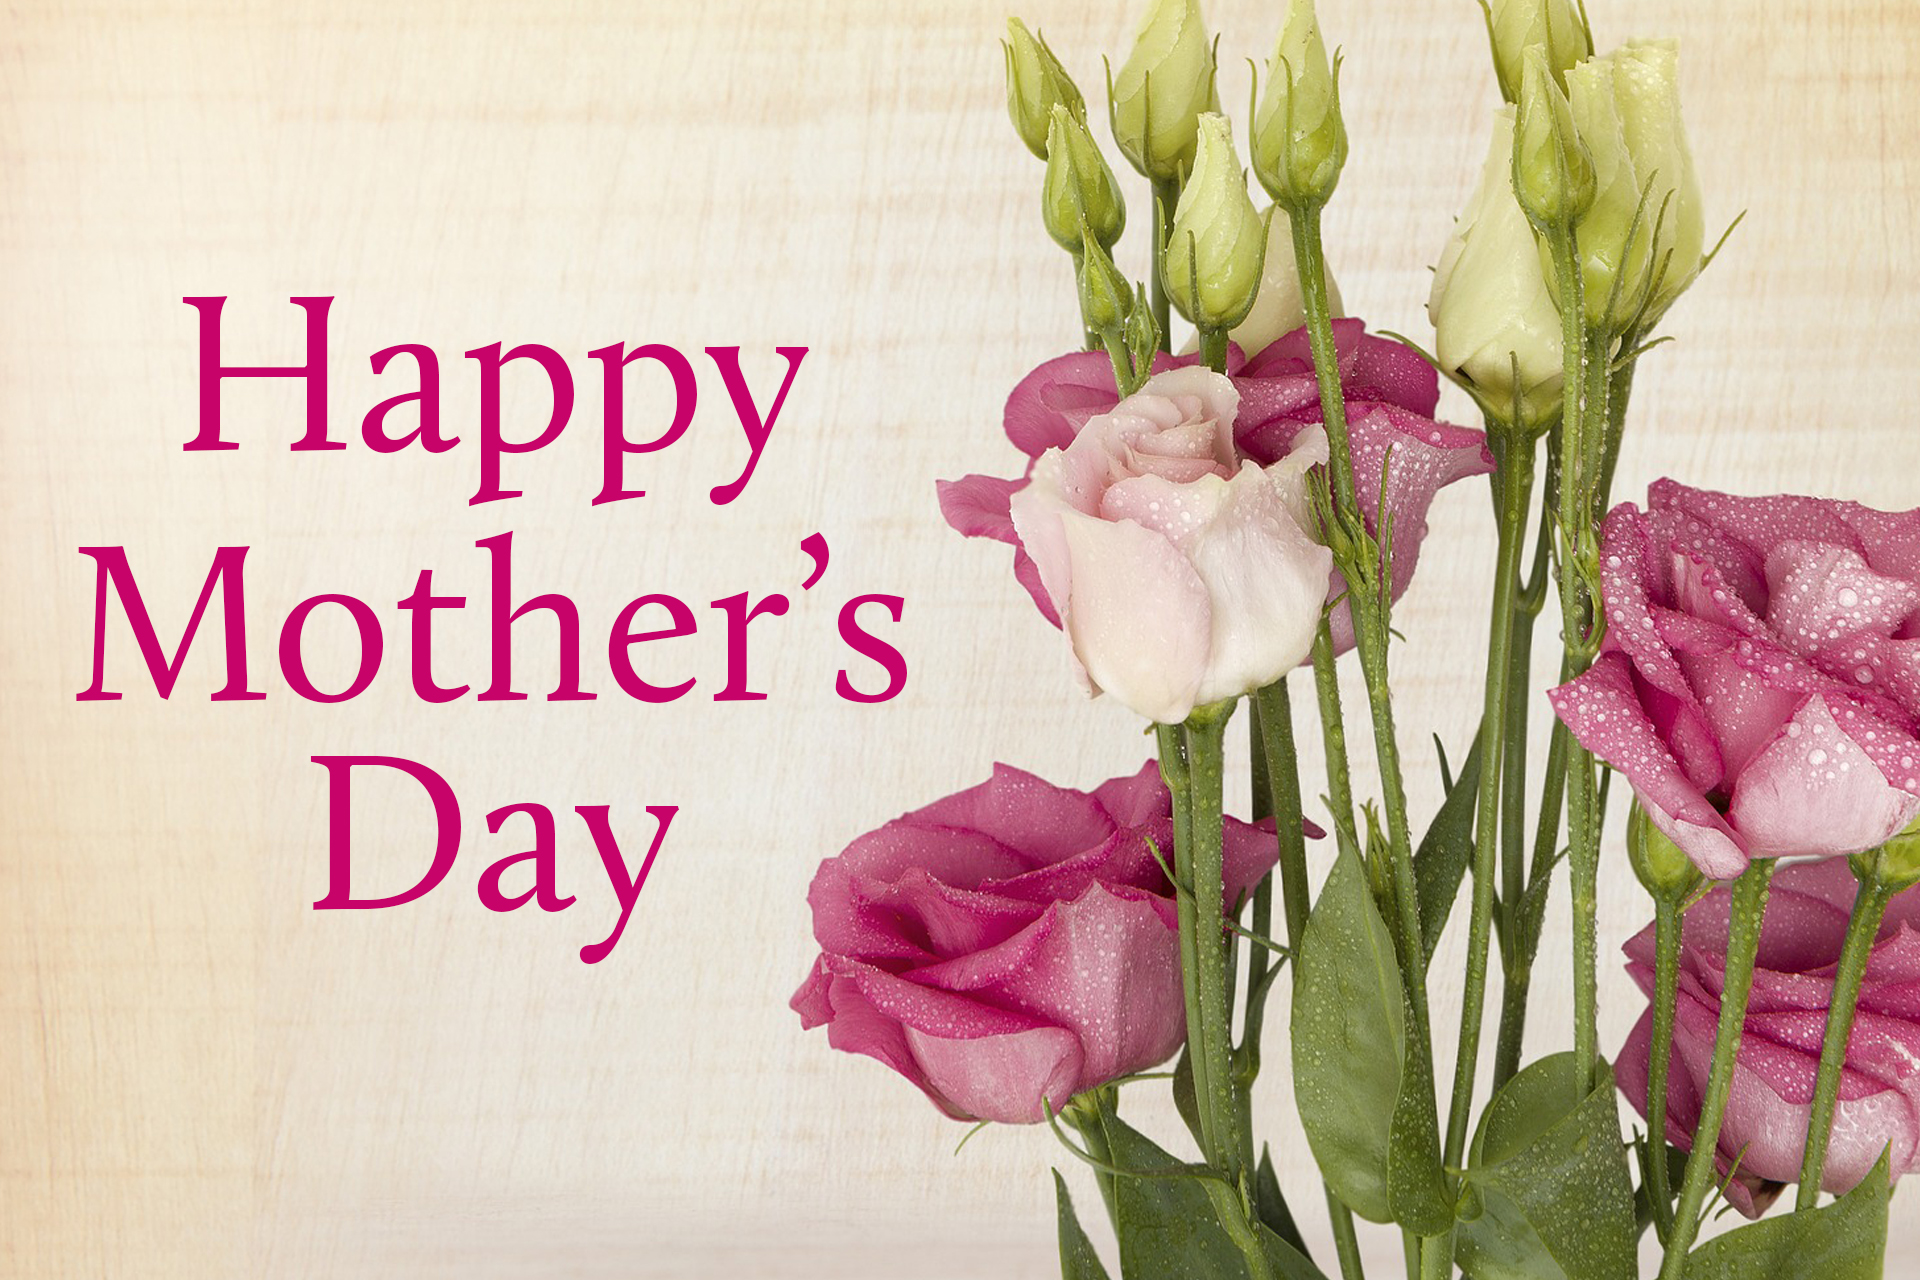 Mothers Day 2019 Pictures - Happy Mothers Day 2018 - HD Wallpaper 